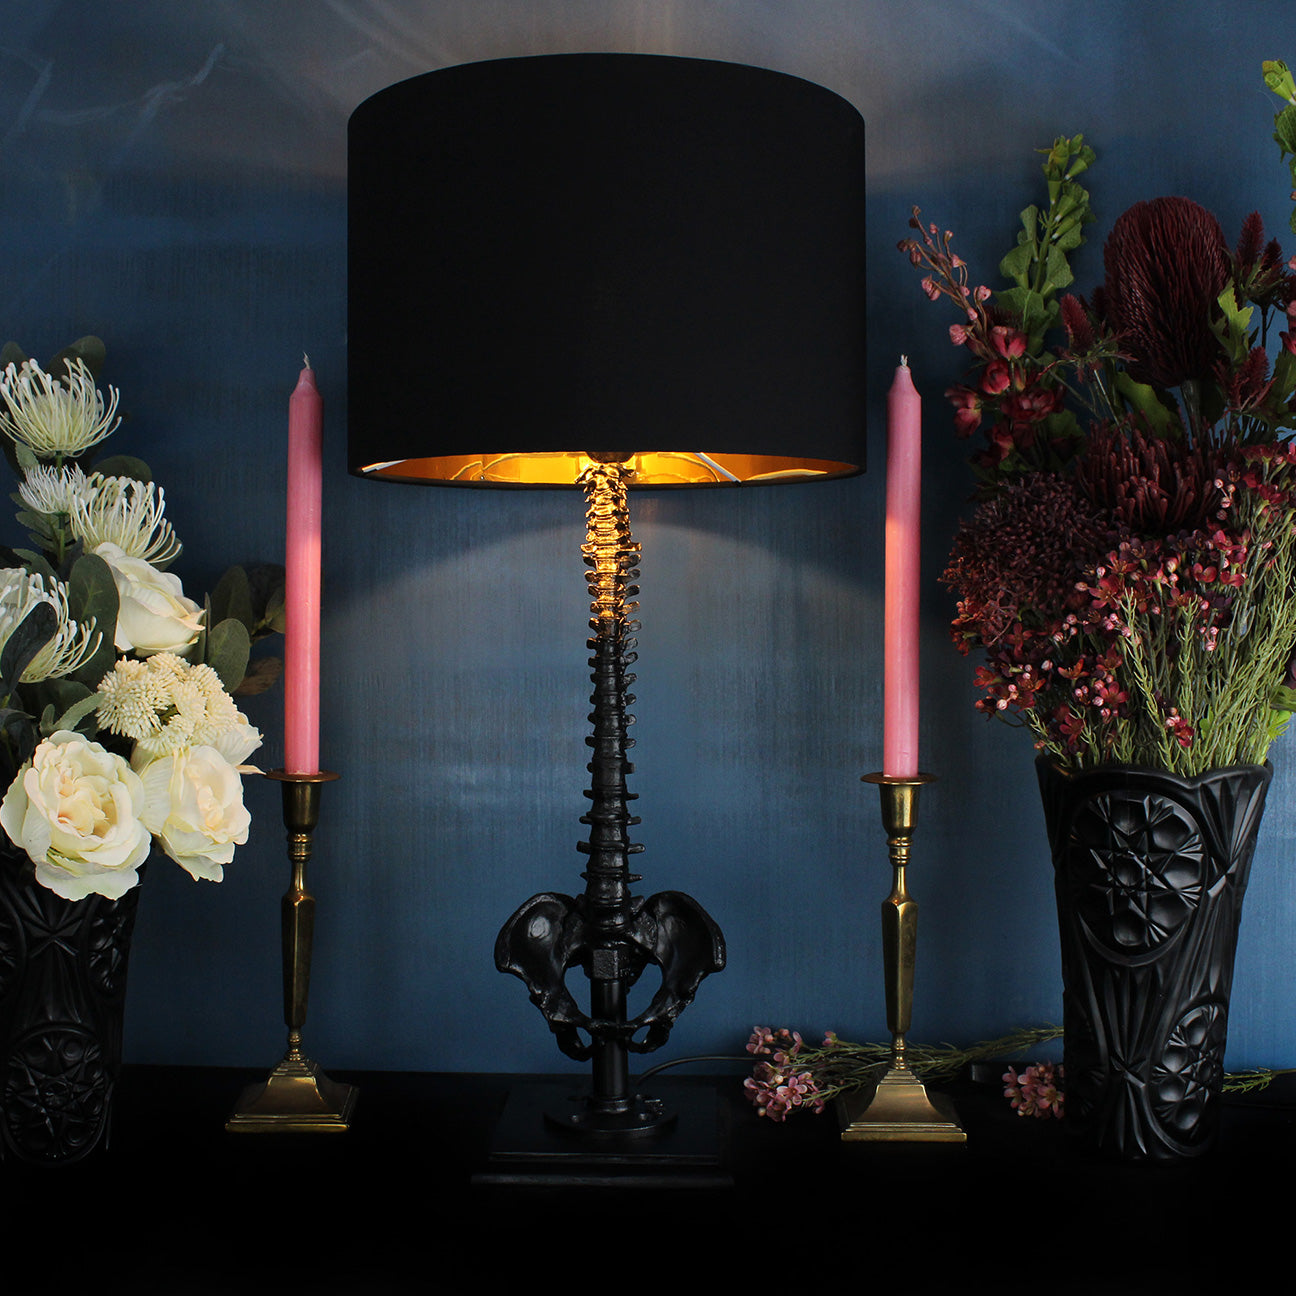 The Black Spine Lamp by The Blackened Teeth